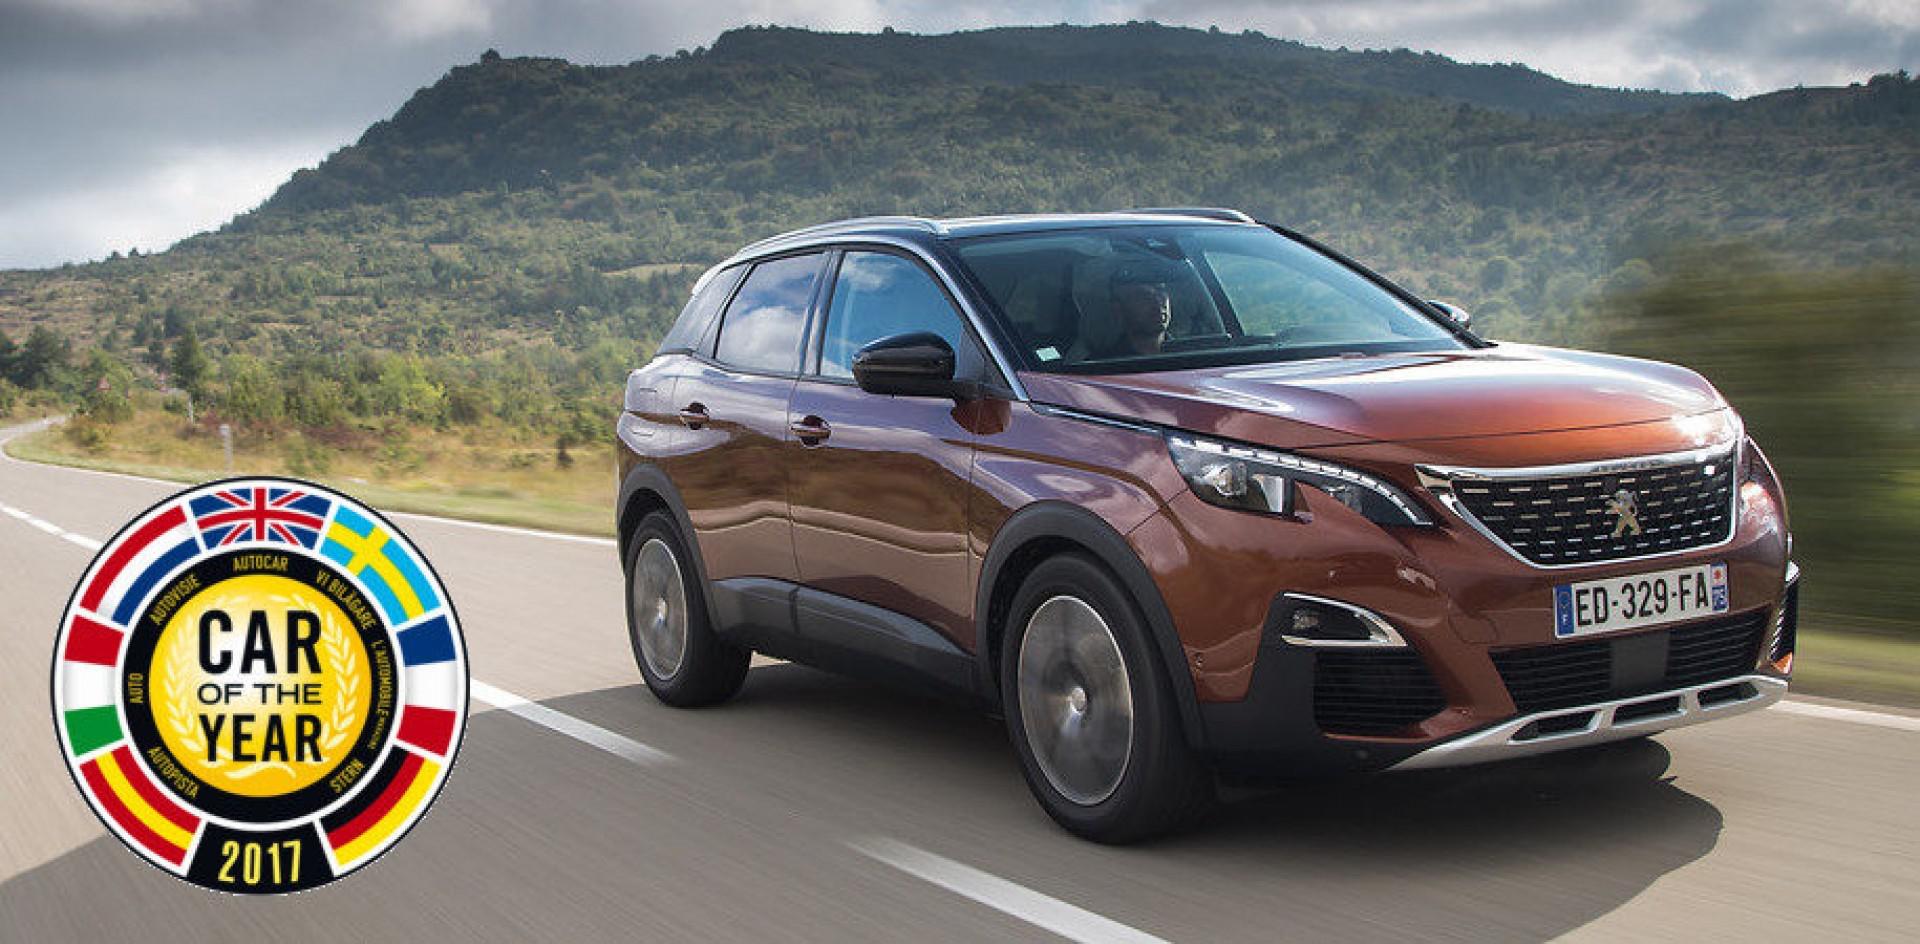 Le SUV PEUGEOT 3008 “Car of the Year 2017”